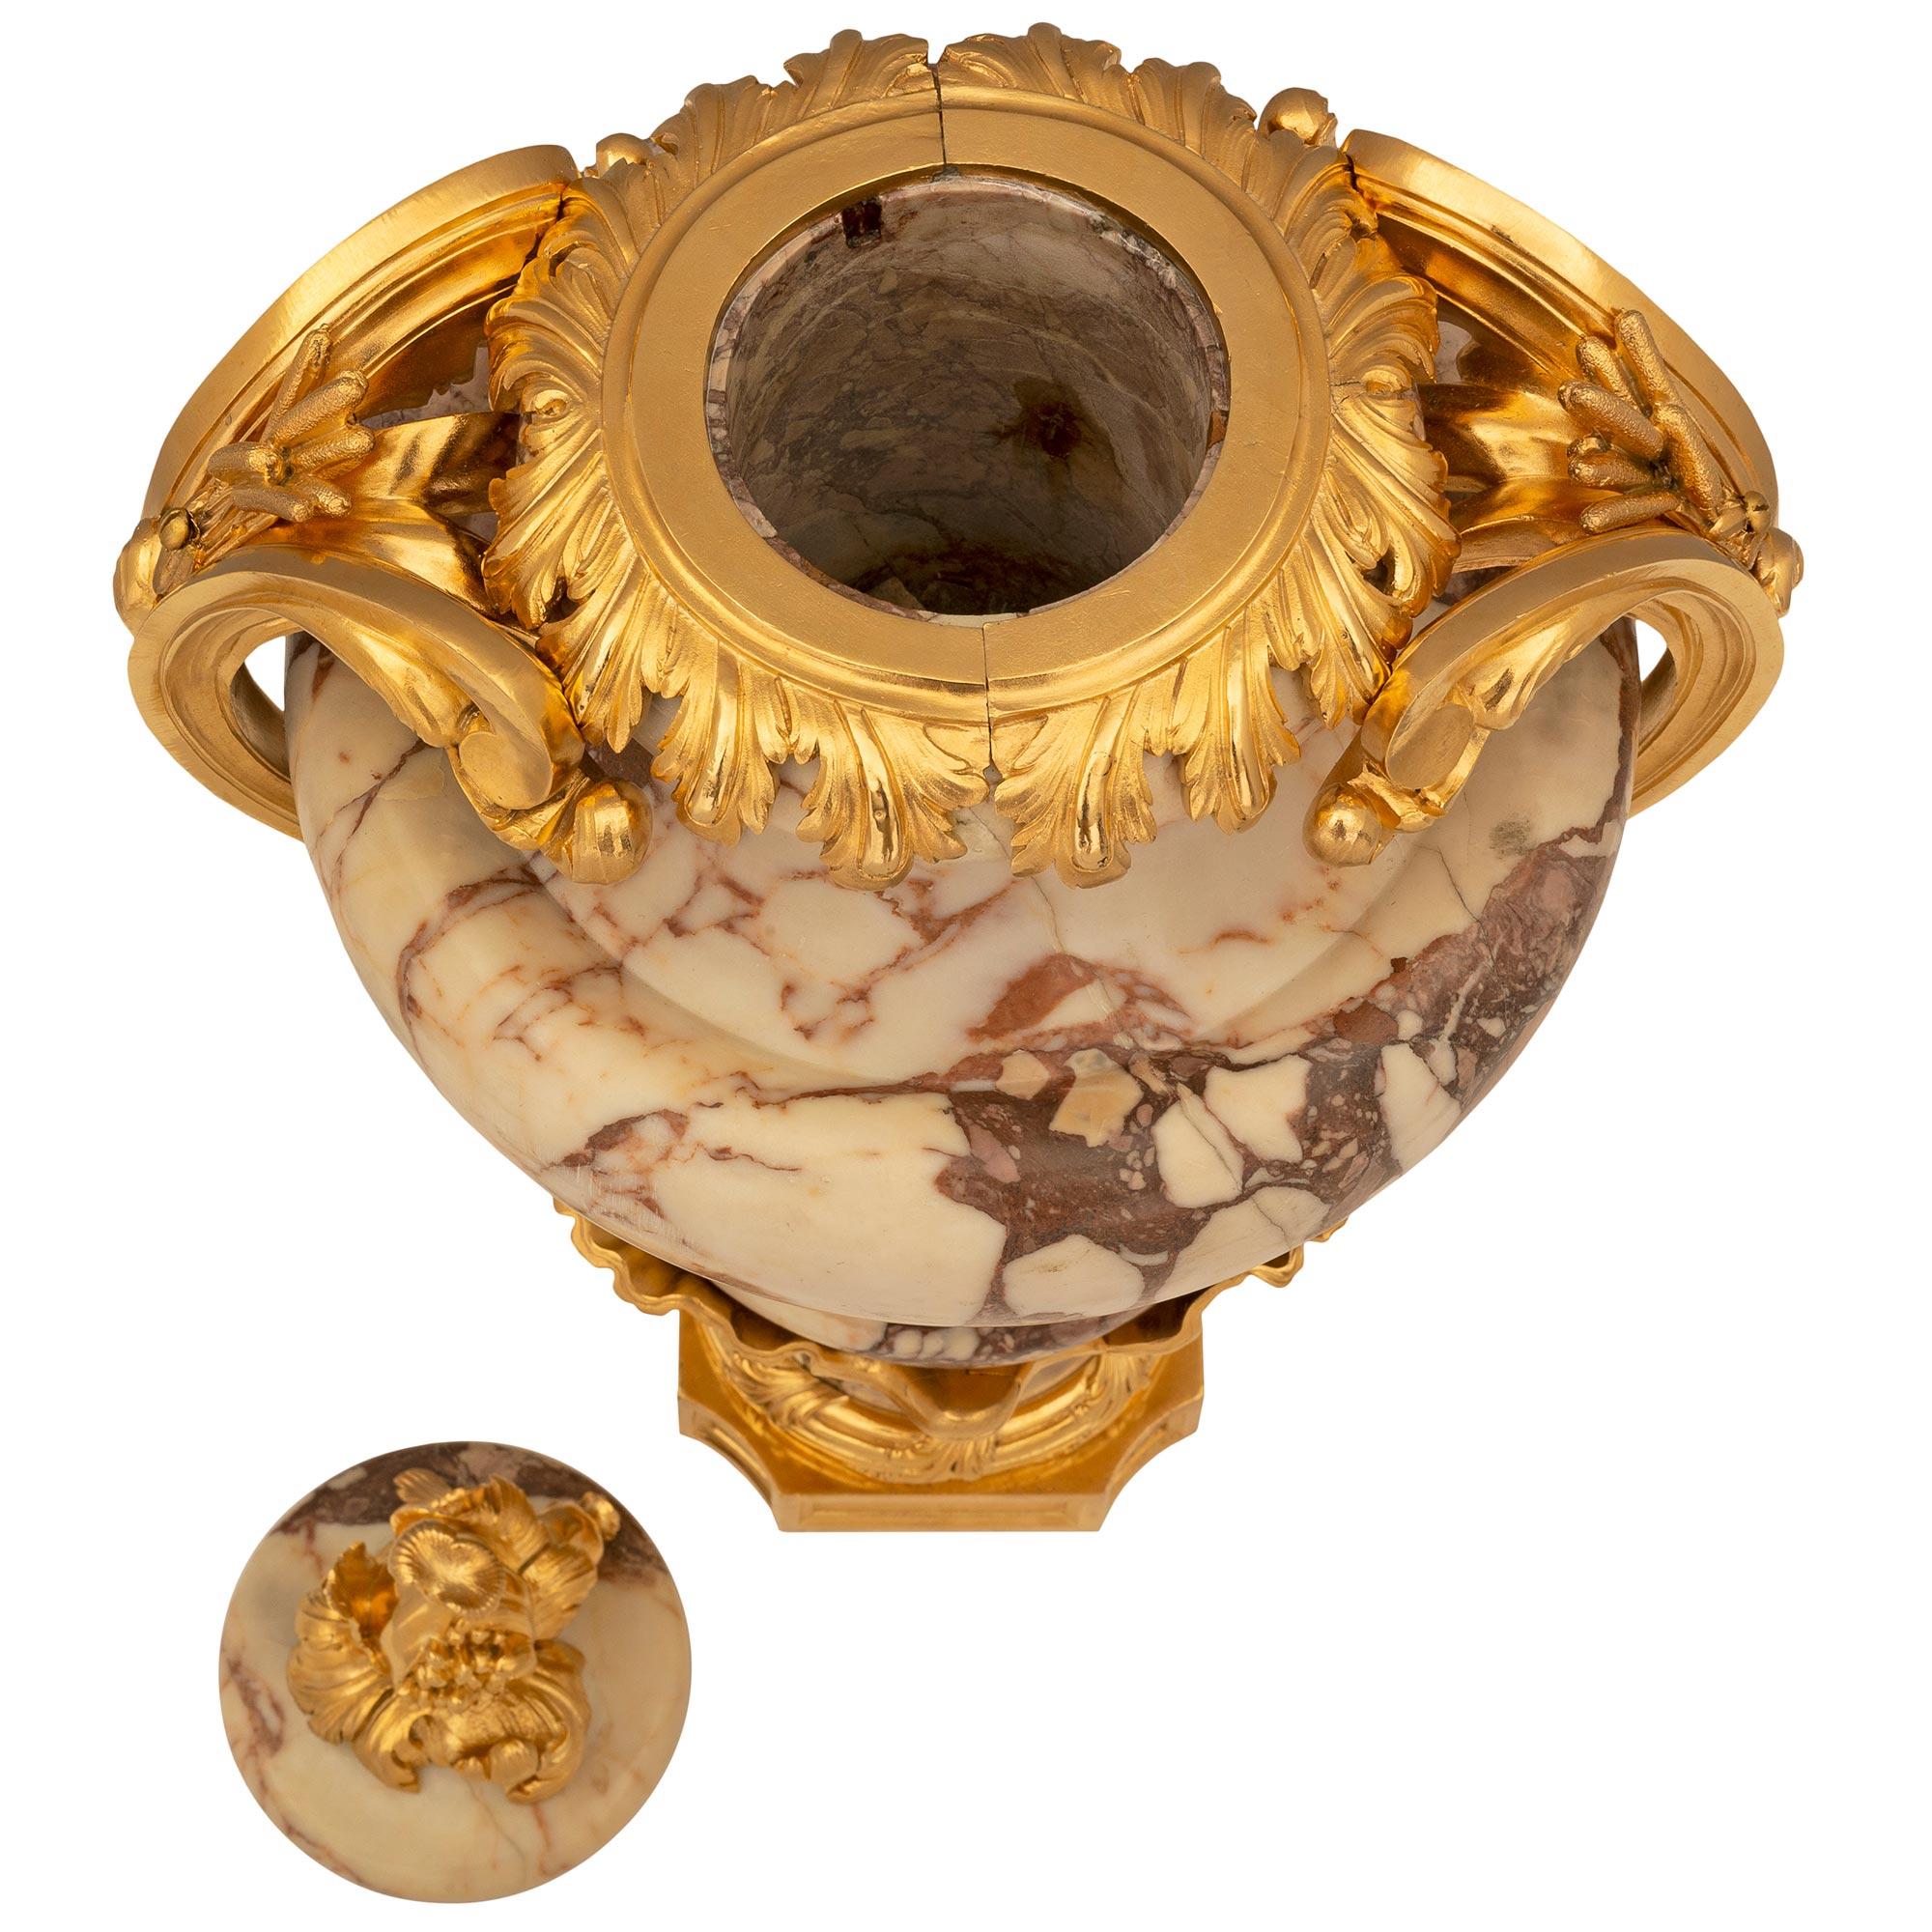 An exceptional French 19th century Louis XV st. Brèche Violette marble and ormolu urn. The impressive urn/trophy is raised by a square ormolu base with concave corners and decorative recessed hammered designs. The socle shaped pedestal support